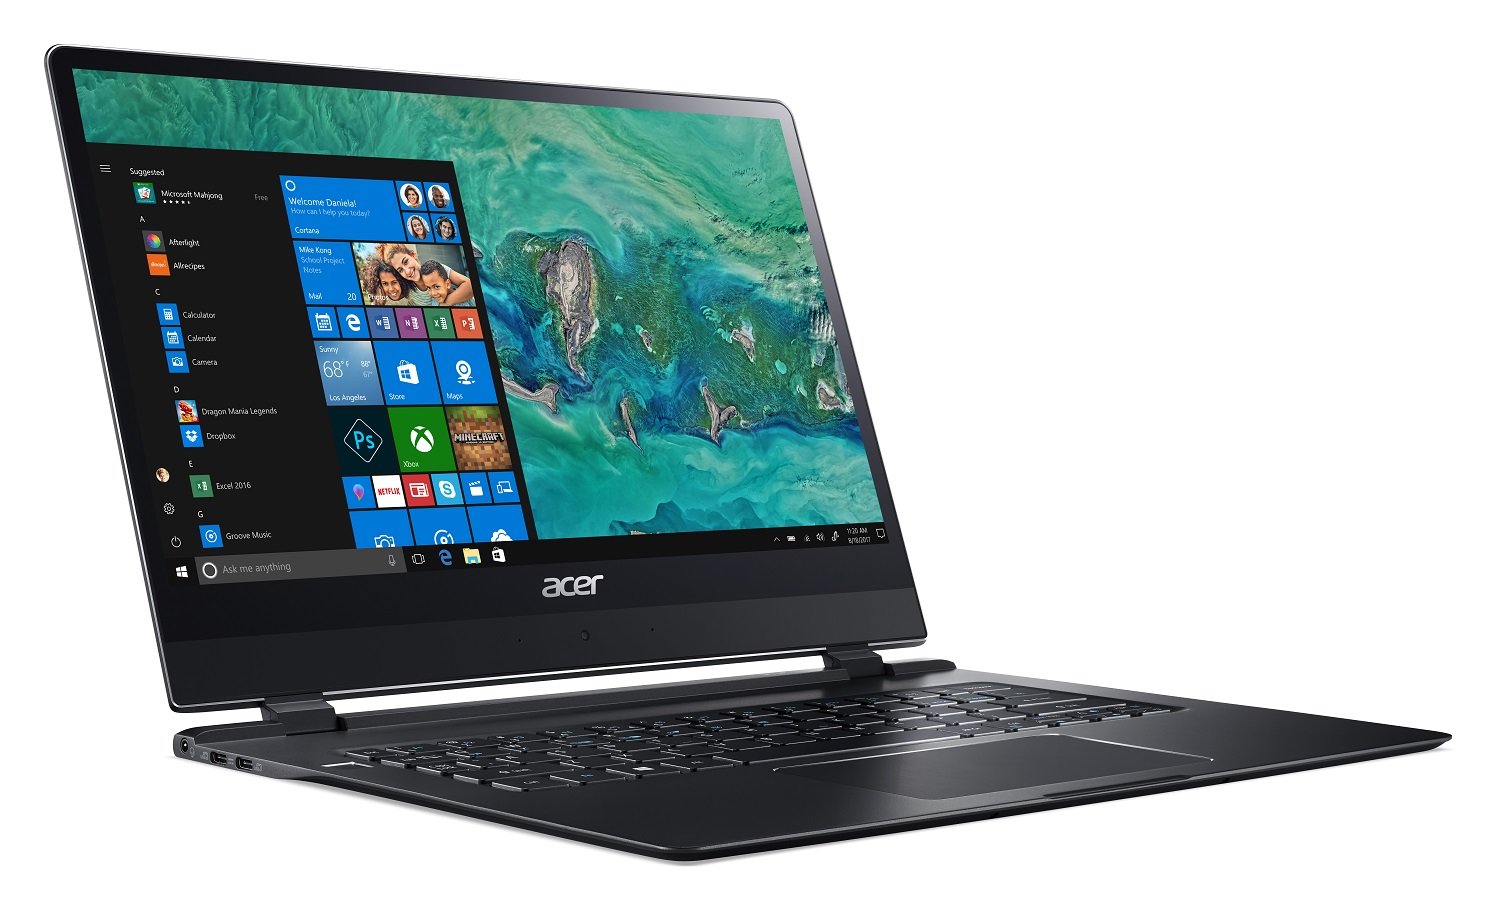 Acer Swift 7 2019 Review: What Acer brings on its new generation of Swift 7 for the latest Acer laptop? - Techandsoft